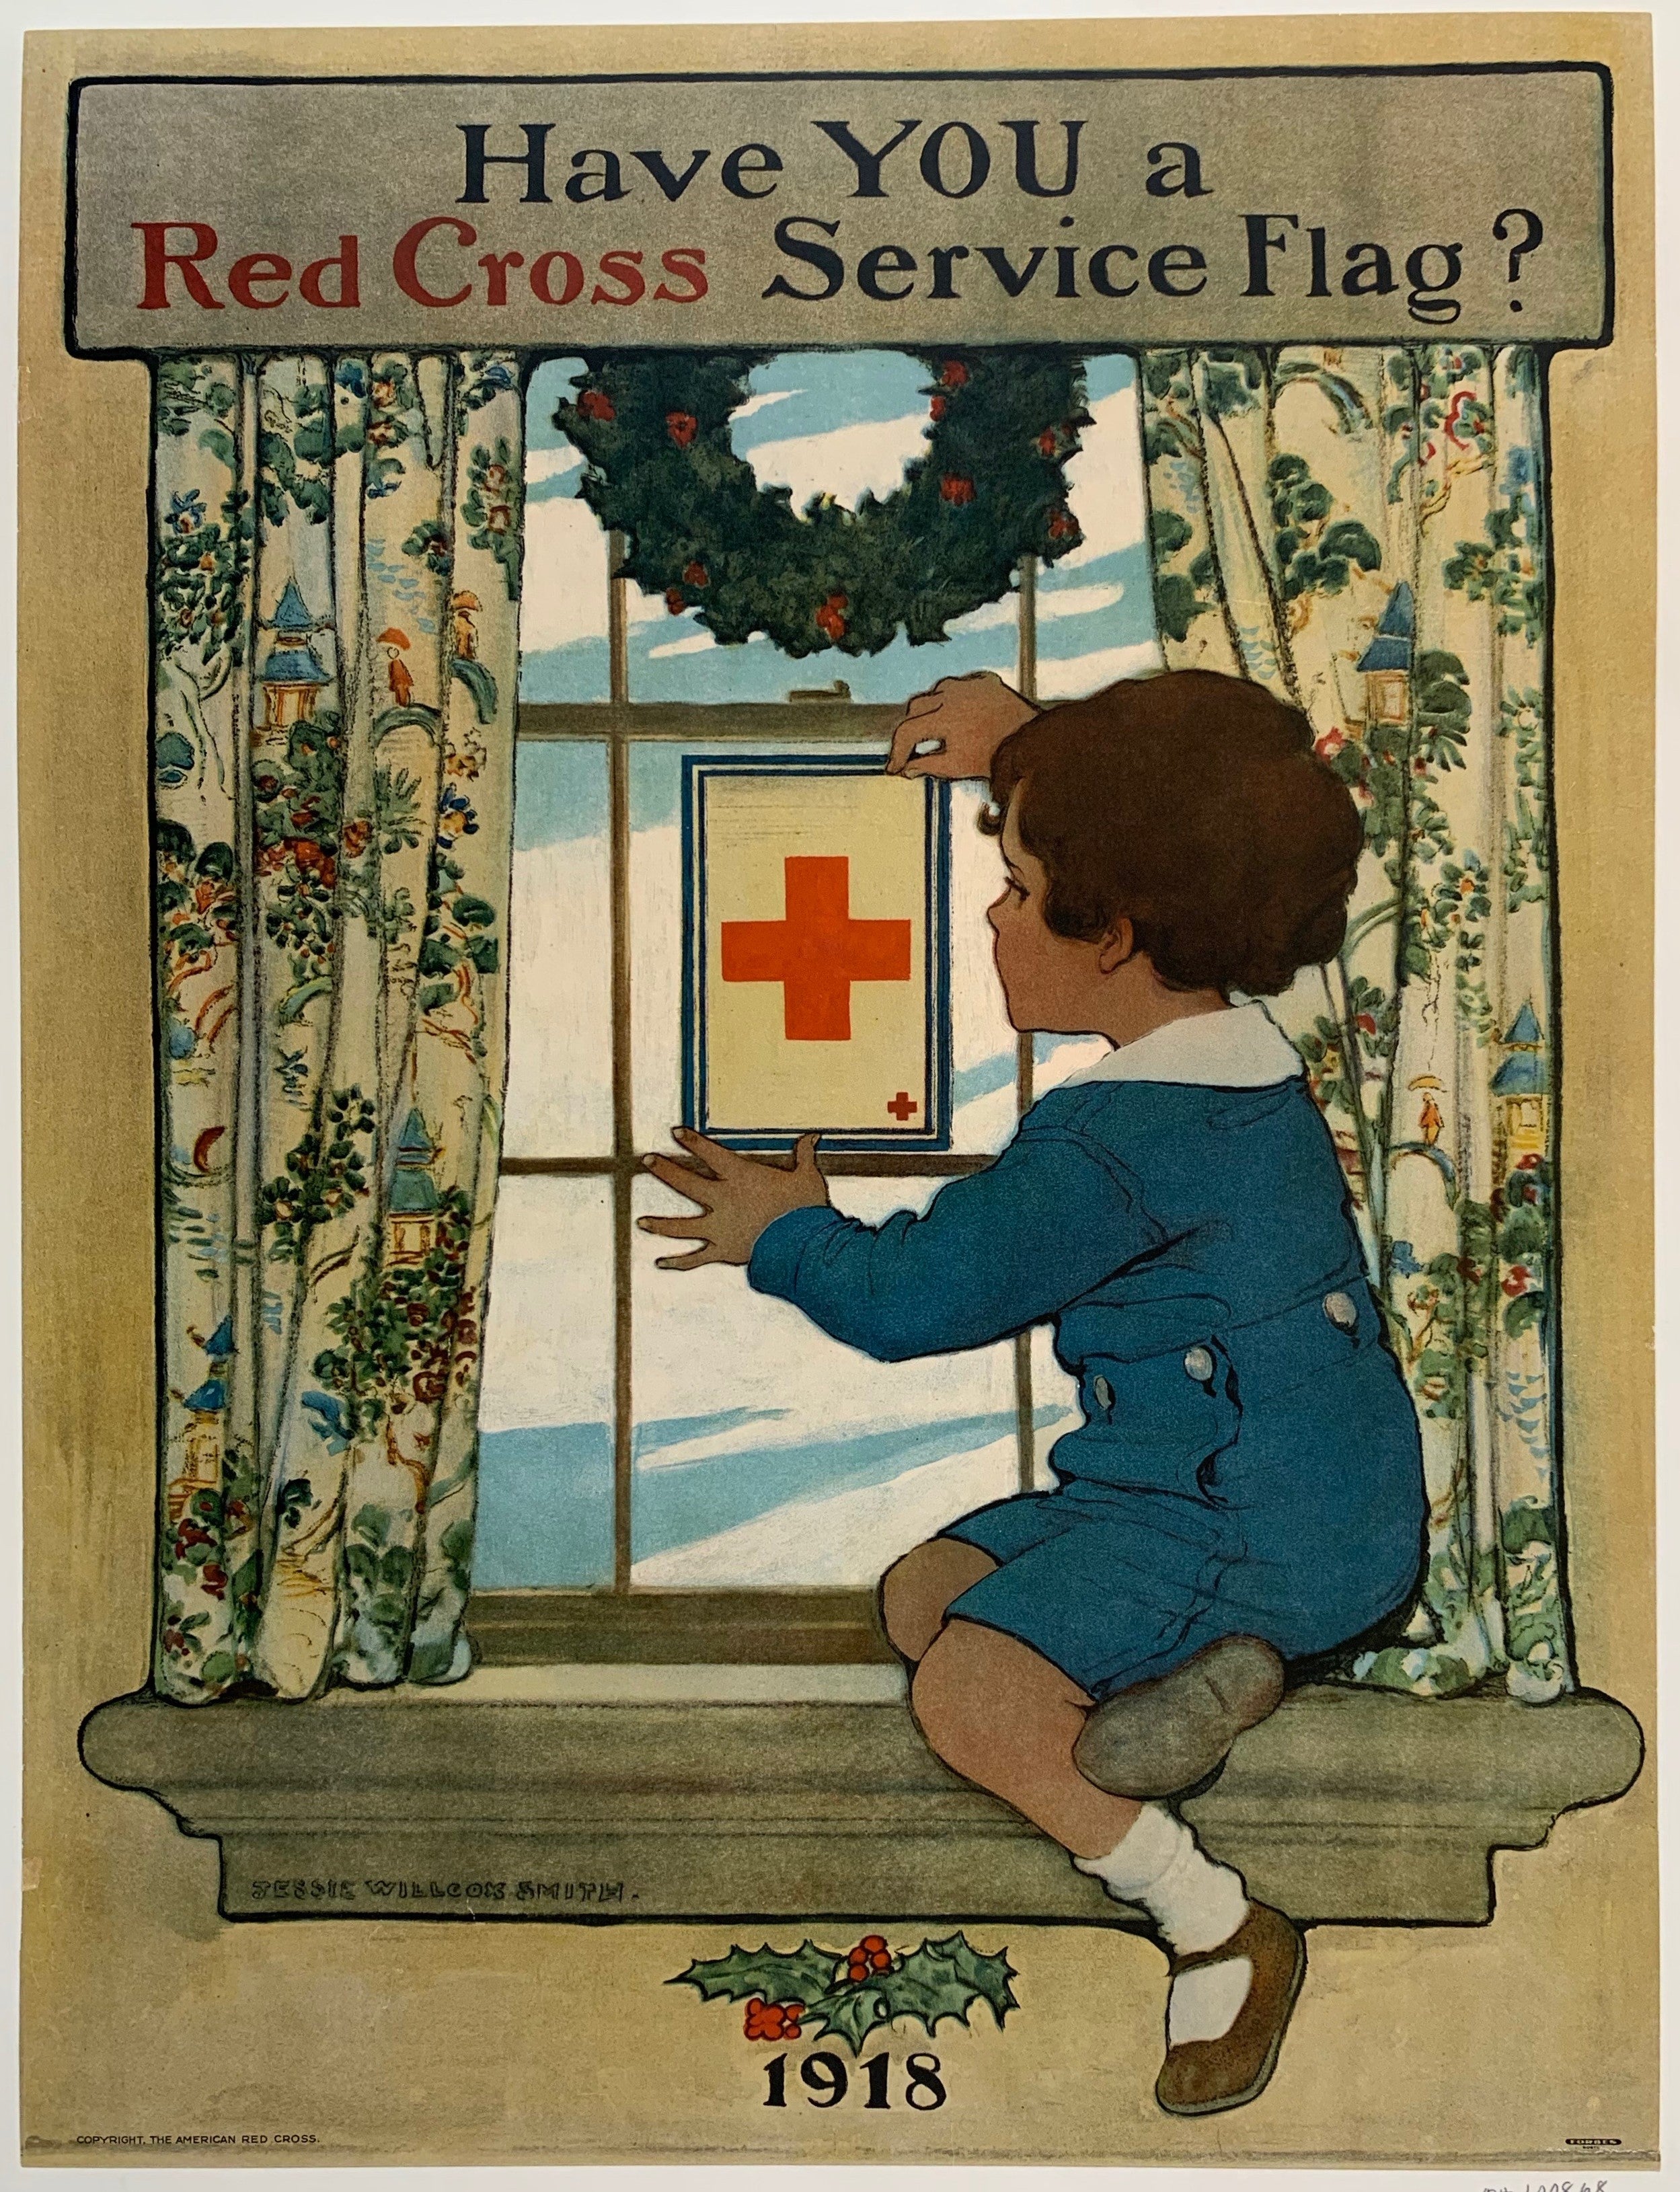 Have YOU a Red Cross Service Flag?